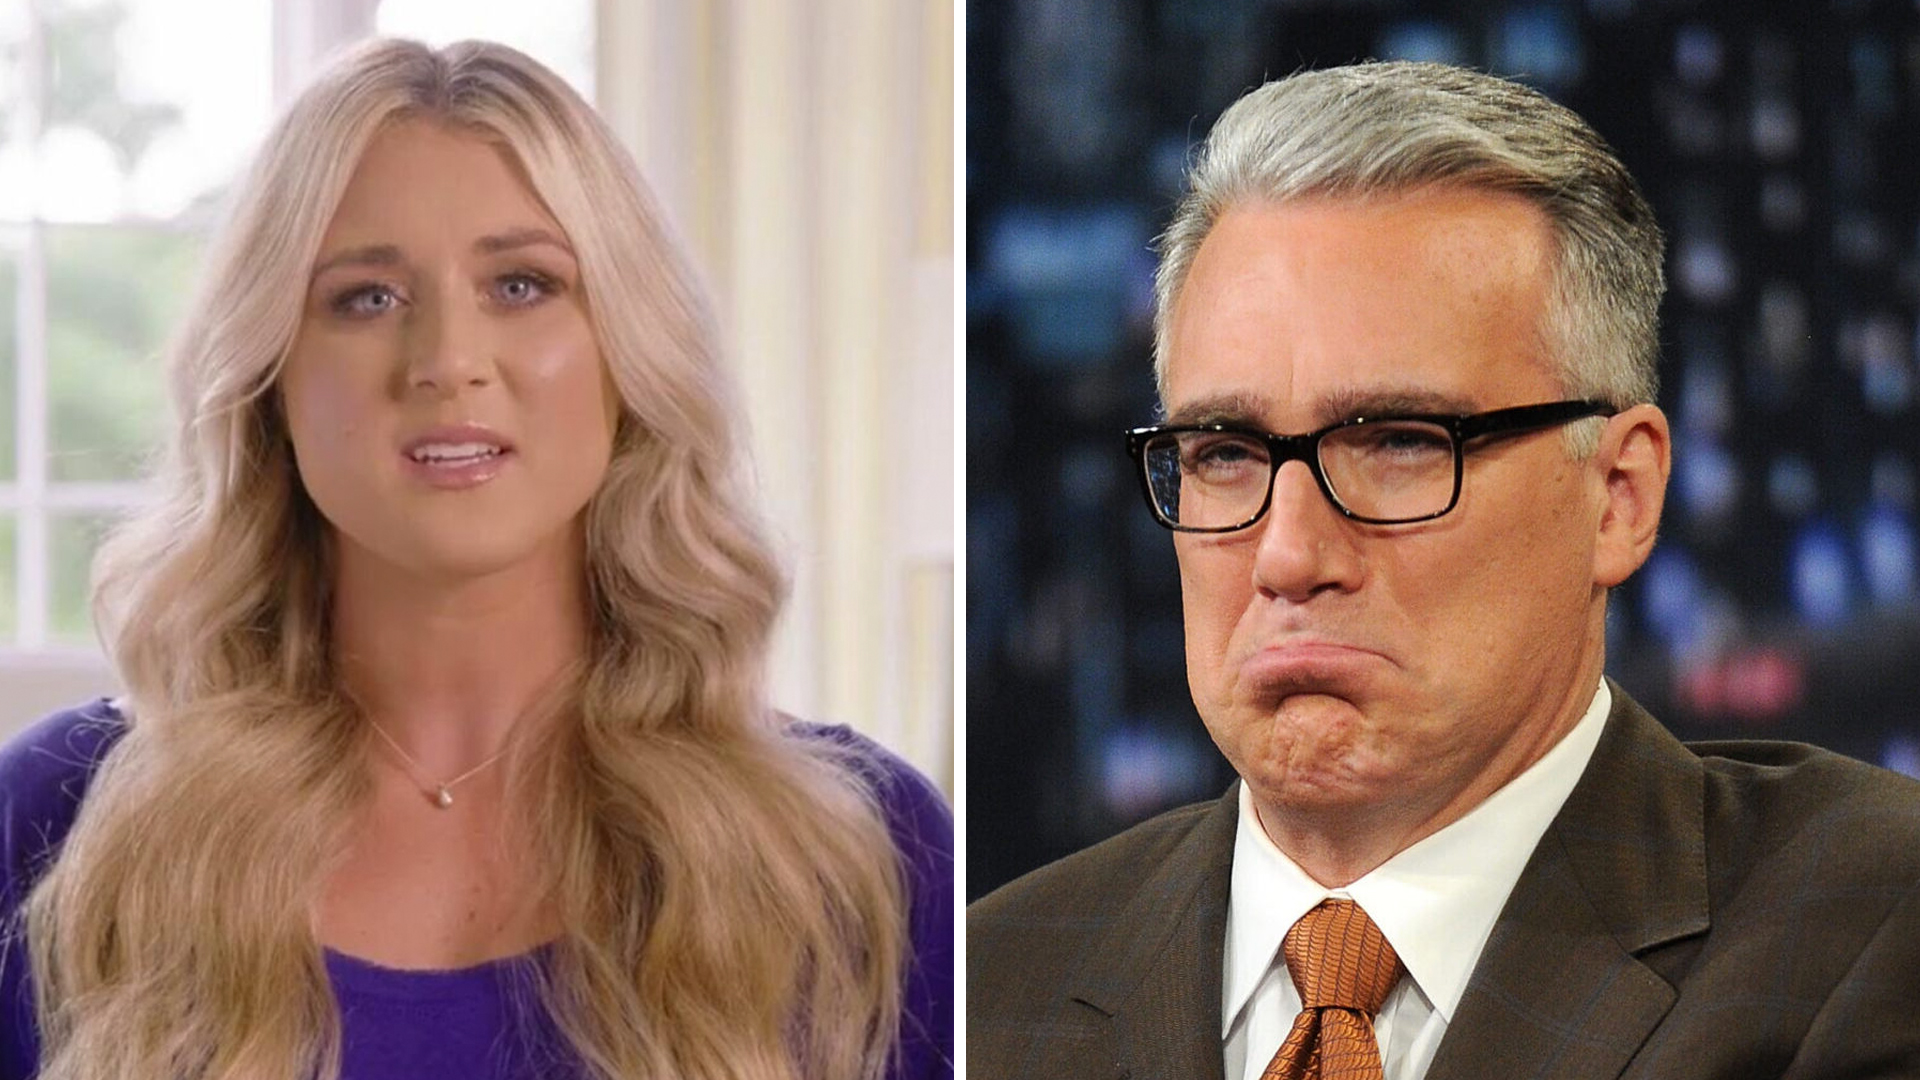 Riley Gaines and Keith Olbermann